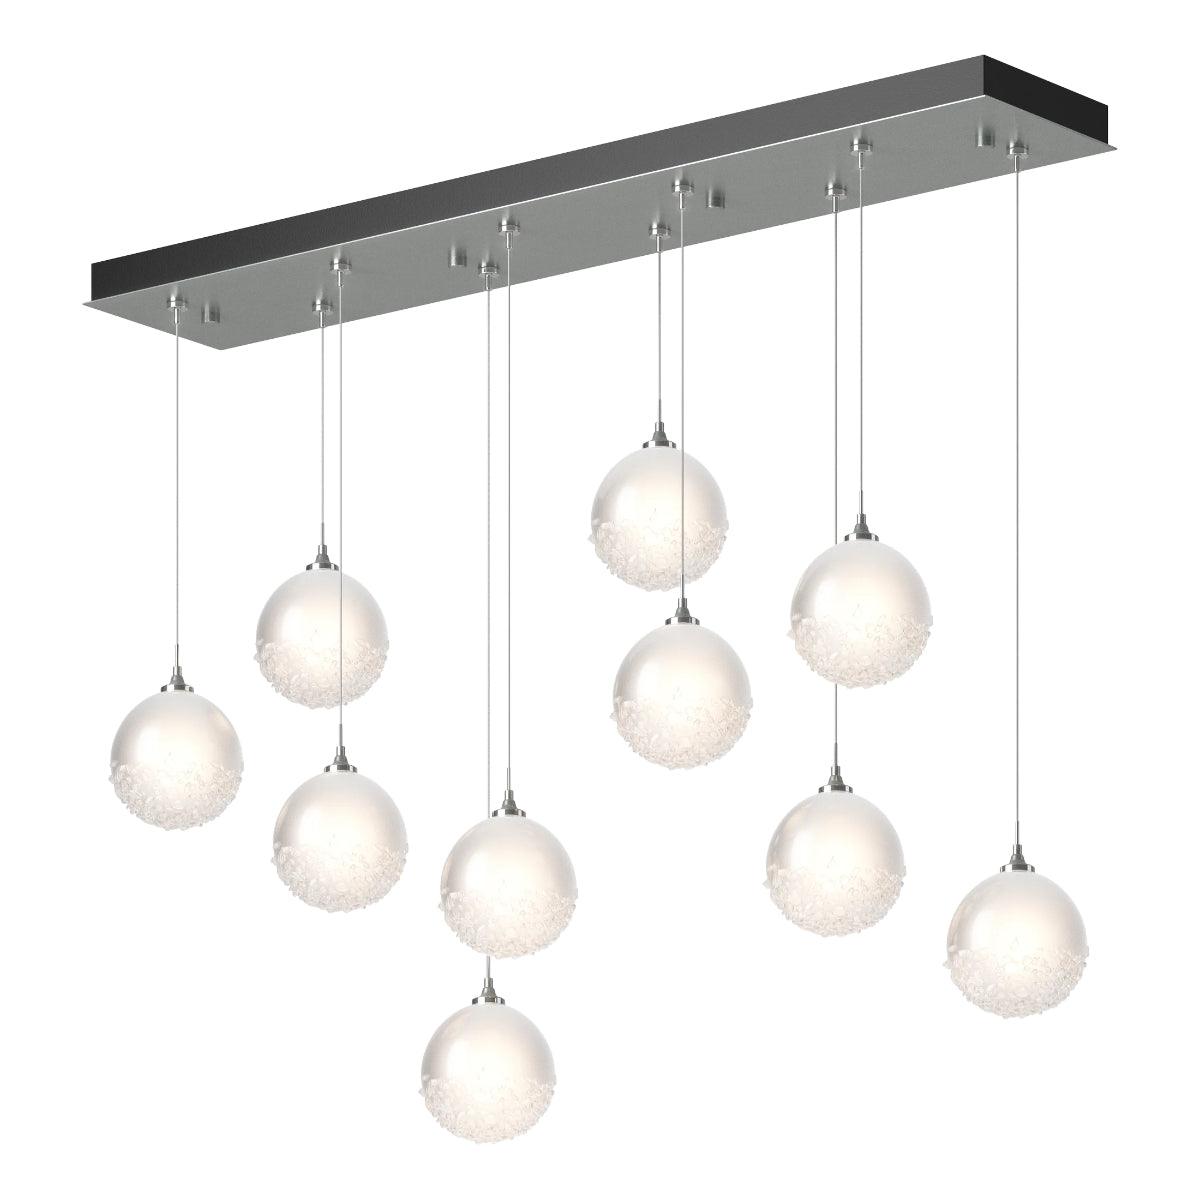 Fritz 45 in. 10 lights Linear Pendant Light with Standard Height